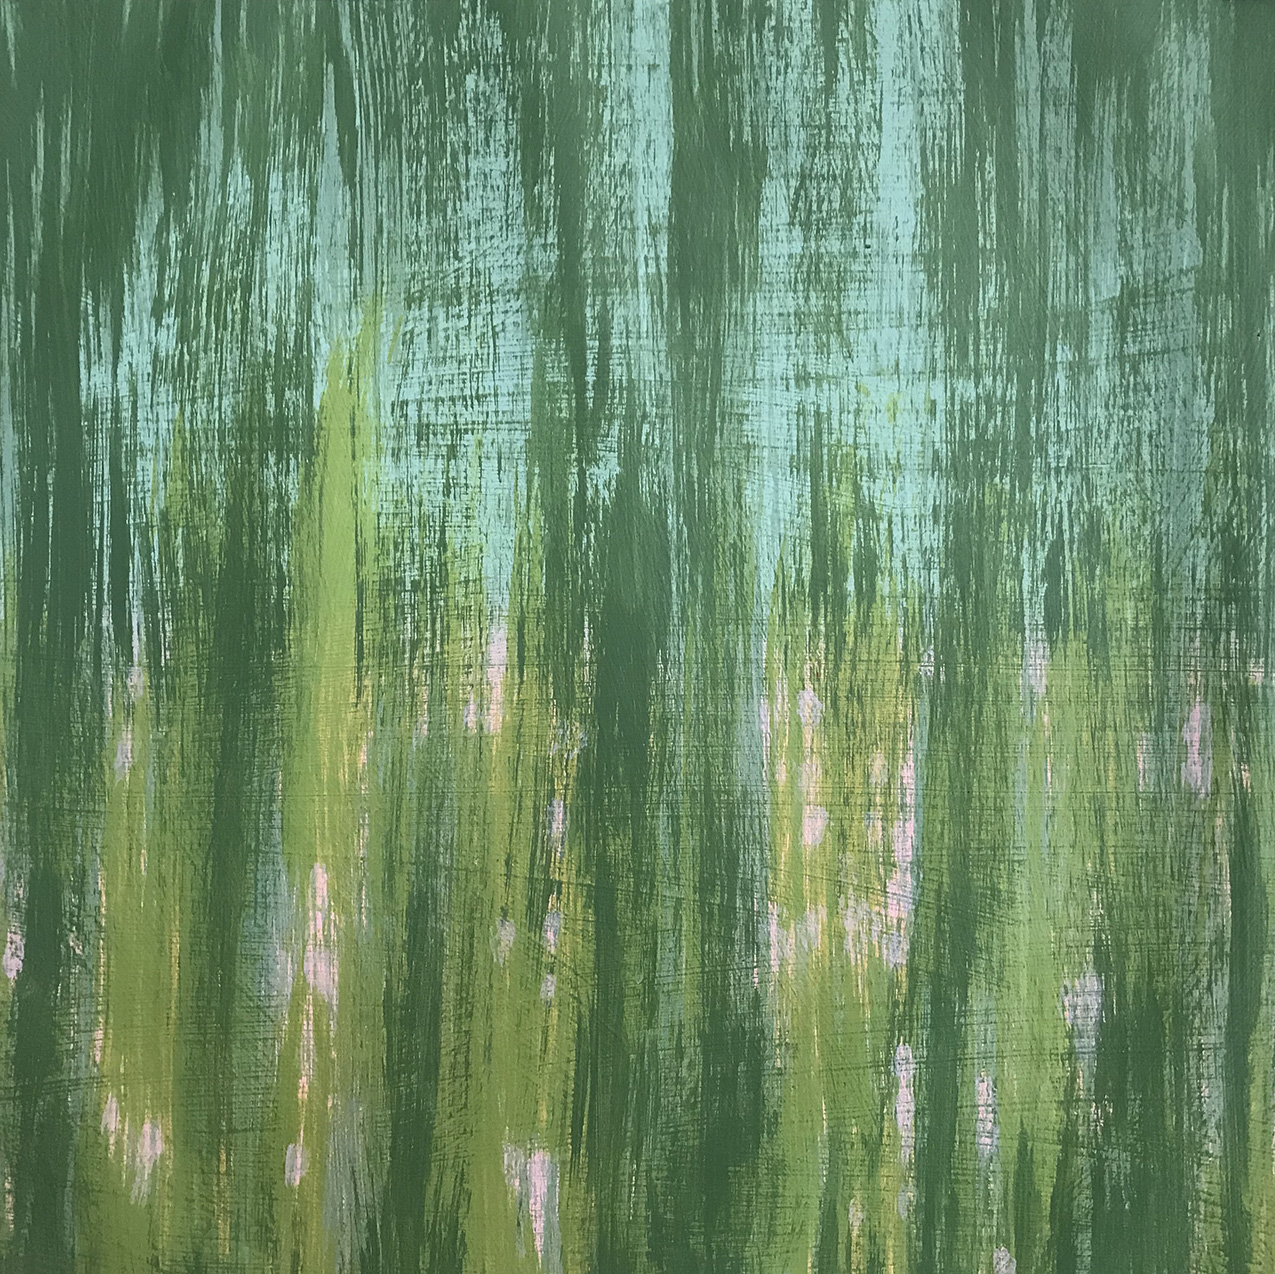 abstract painting of vertical brush strokes in various shades of green